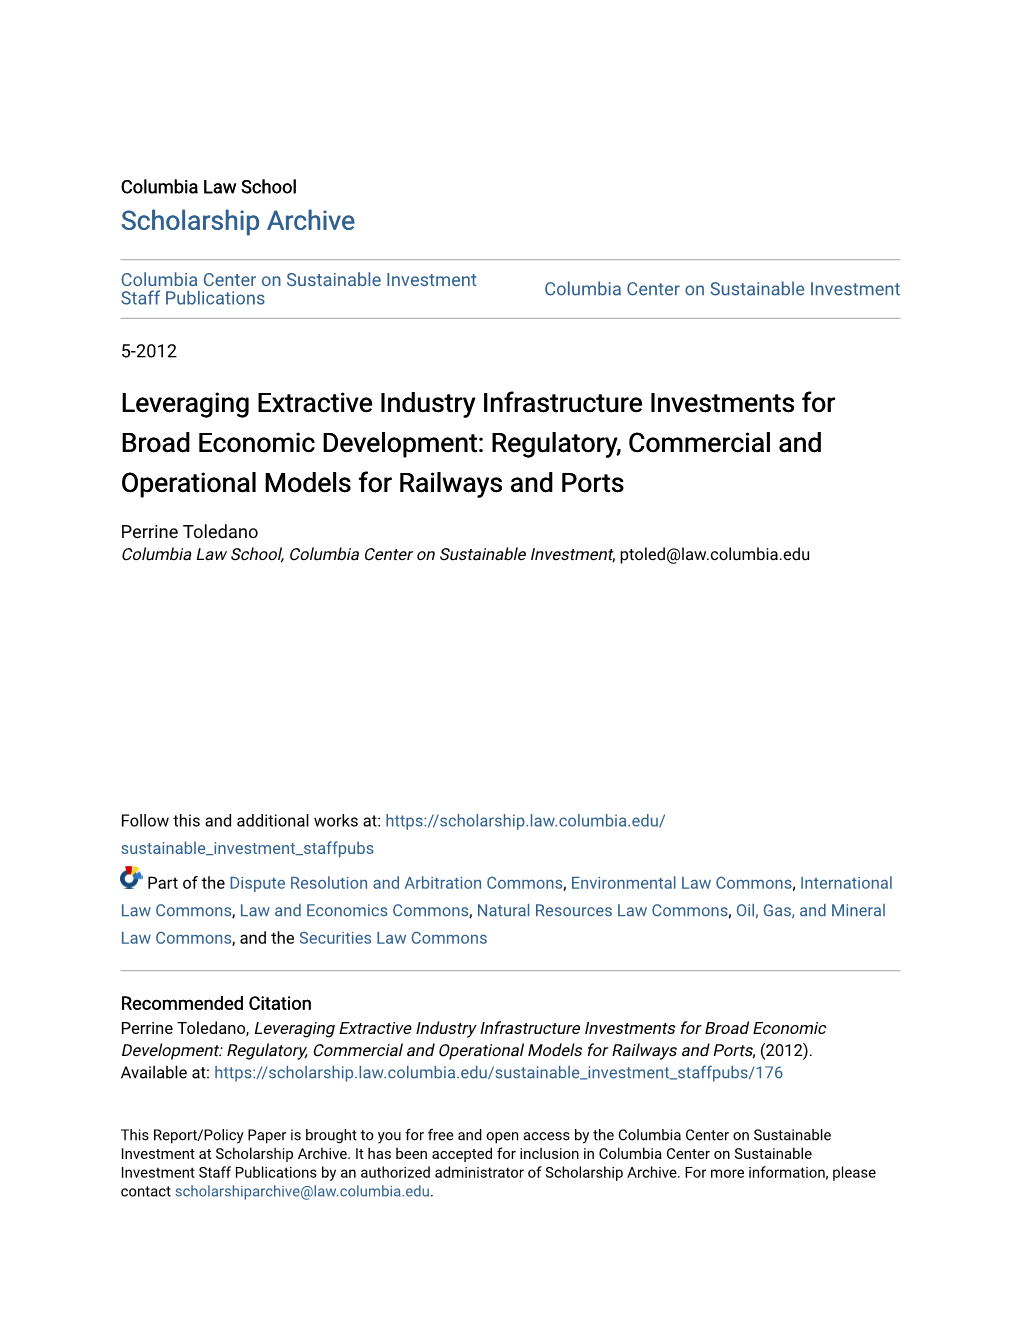 Leveraging Extractive Industry Infrastructure Investments for Broad Economic Development: Regulatory, Commercial and Operational Models for Railways and Ports